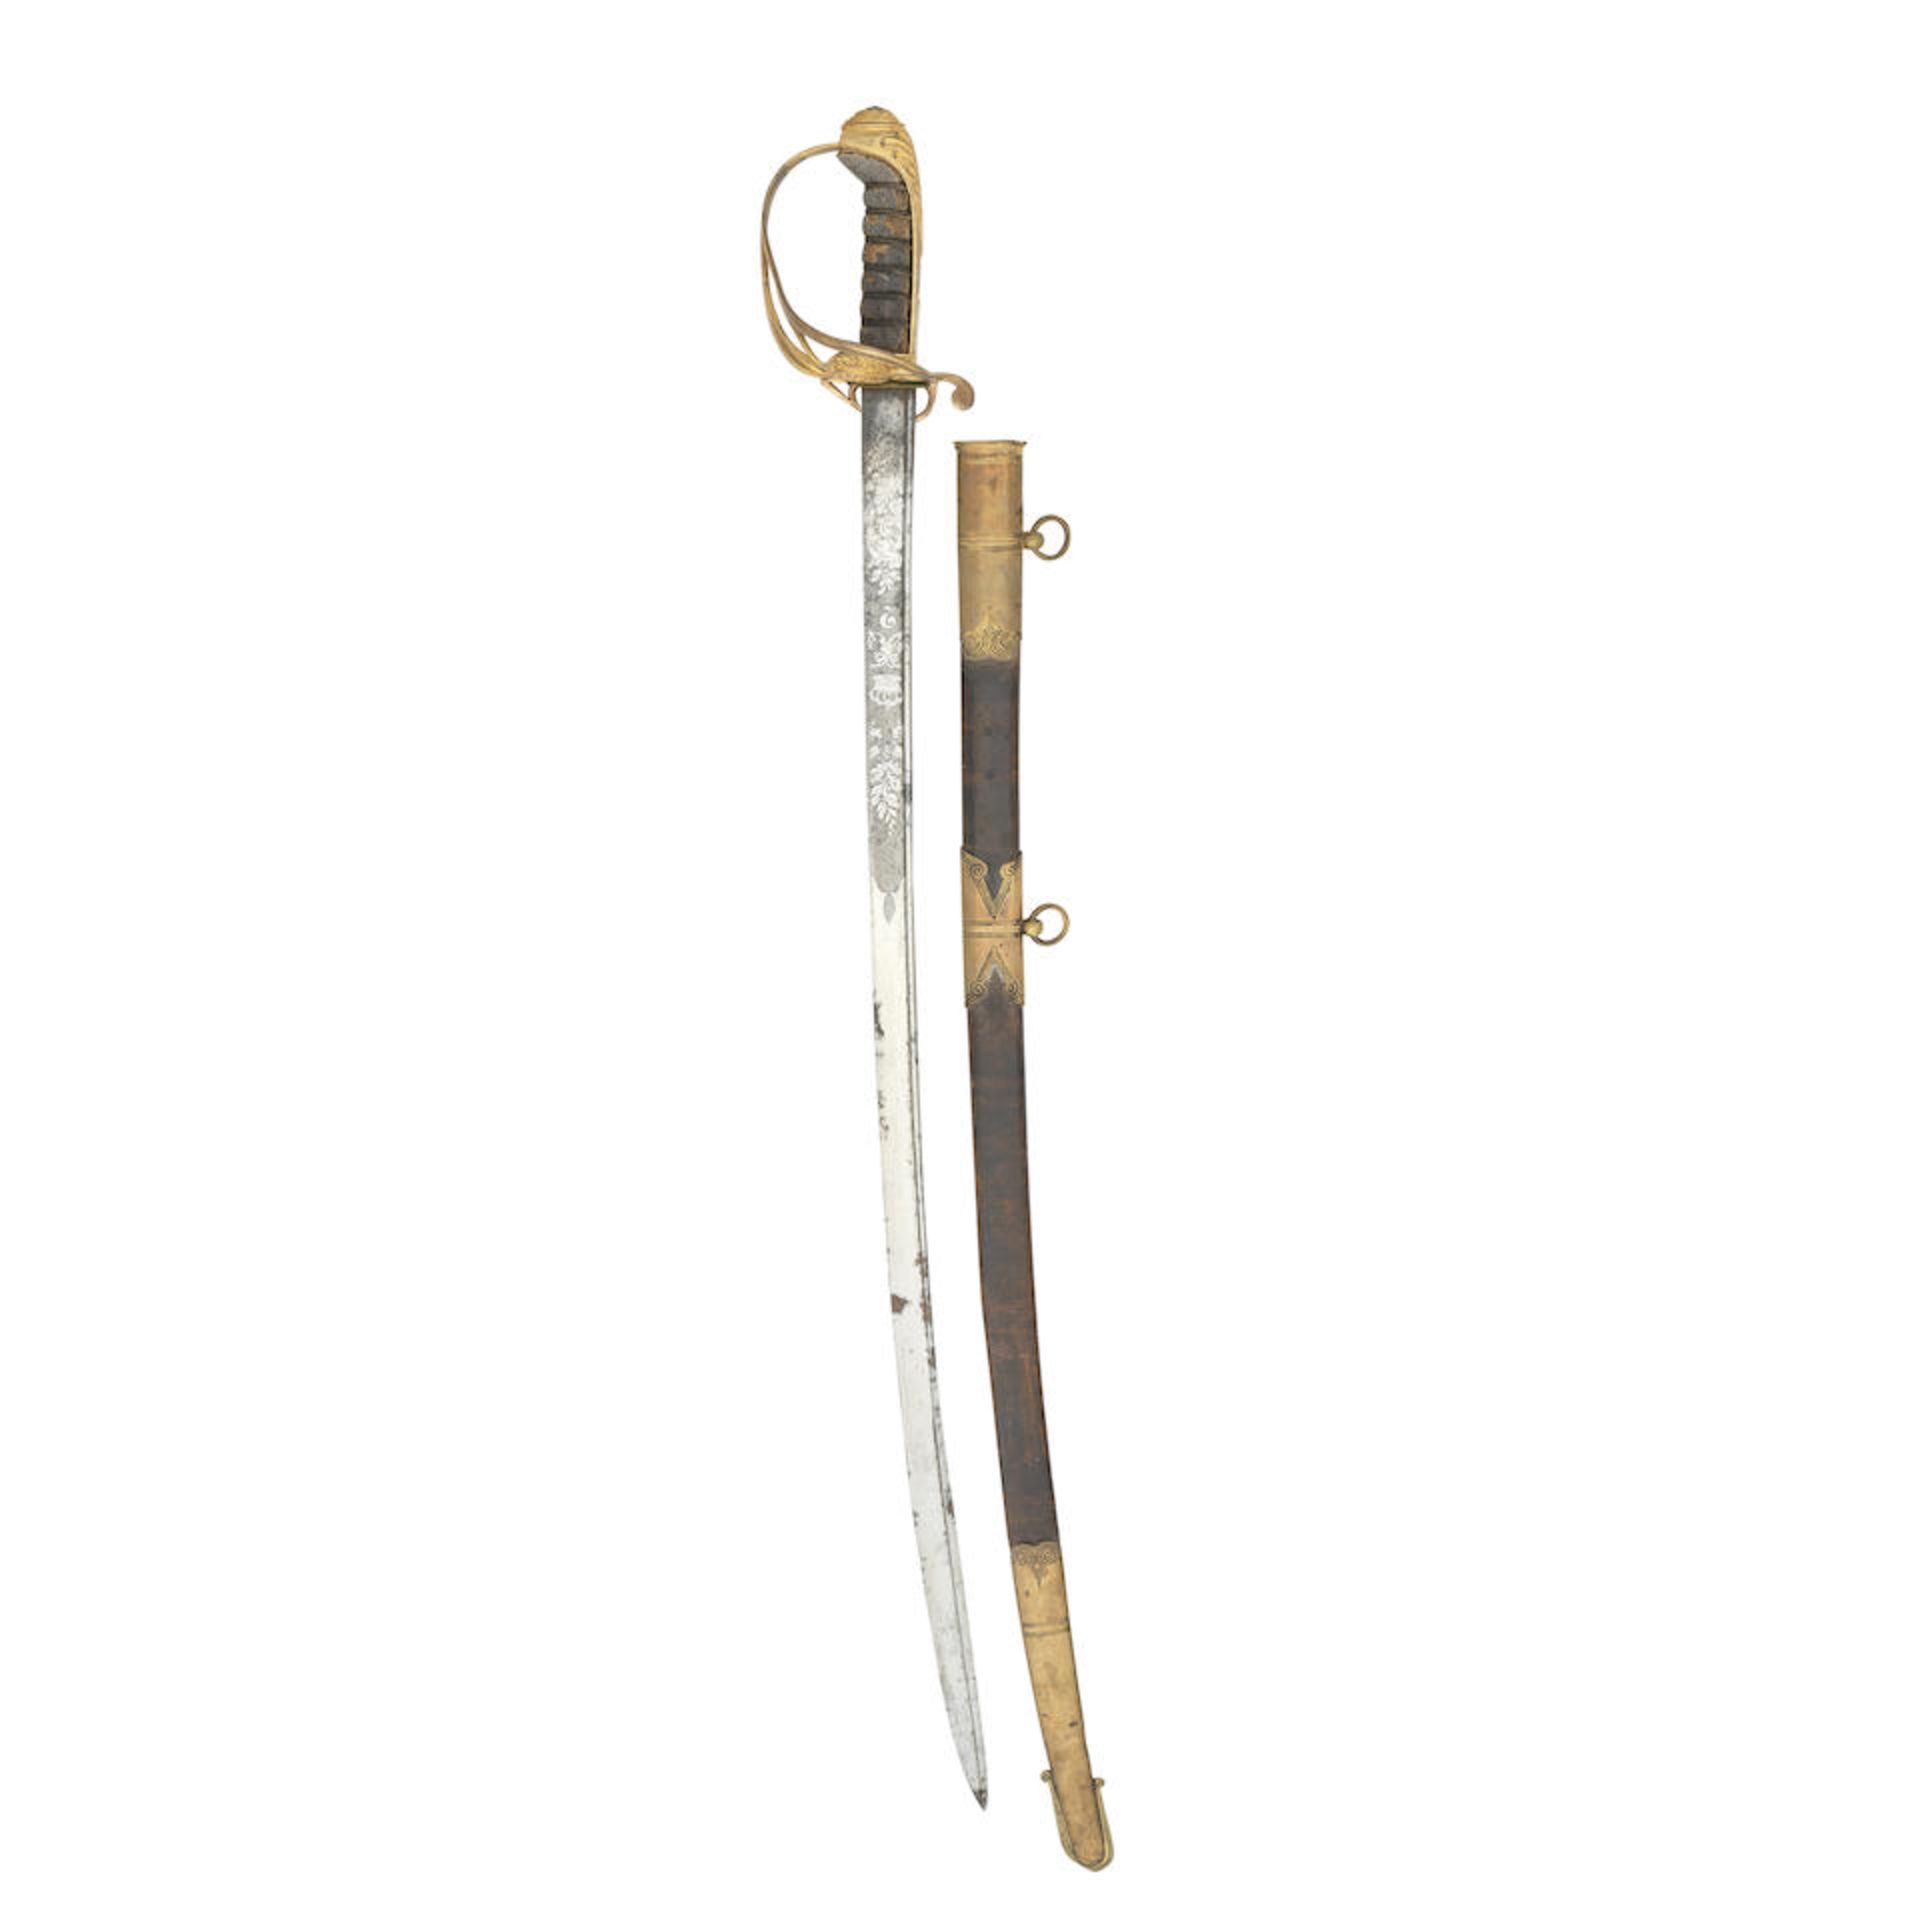 A Rare 1822 Pattern British Officer's Sword Of The Spanish Auxiliary Legion, Reign Of Queen Isab...